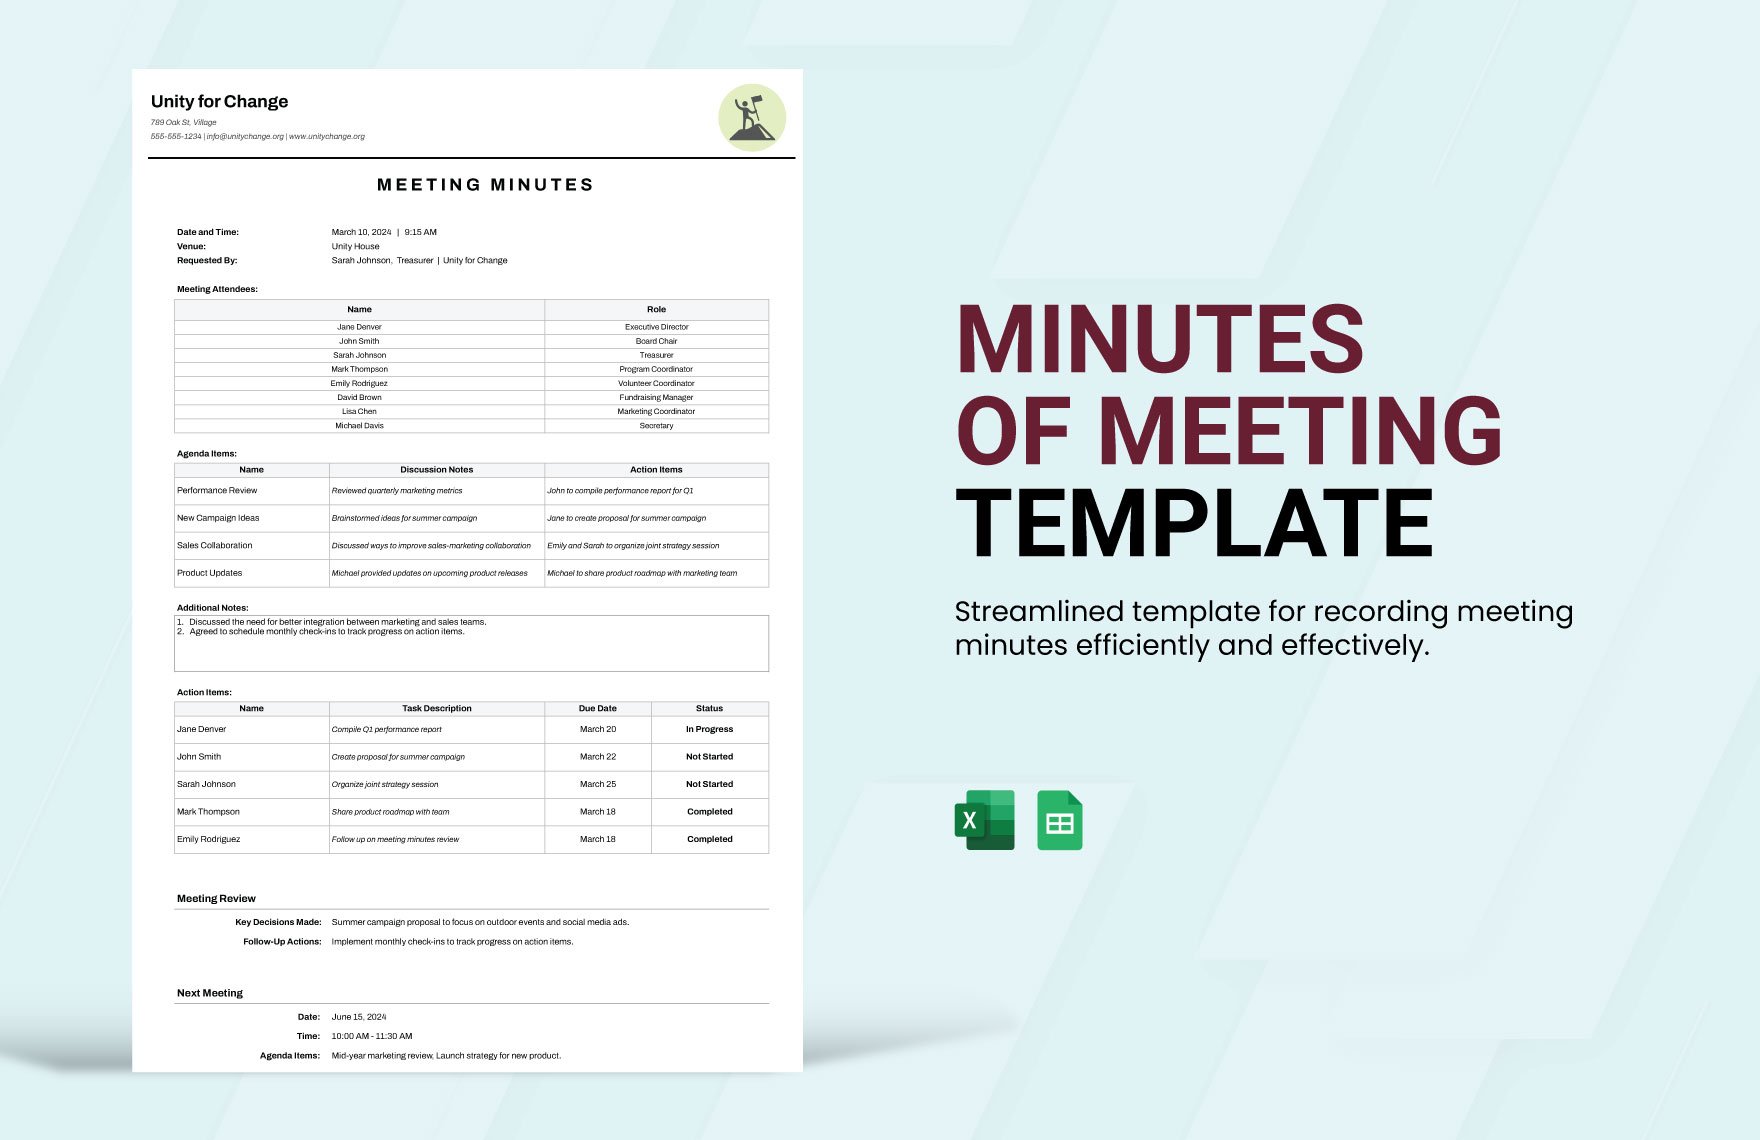 Minutes of Meeting Template in Excel, Google Sheets